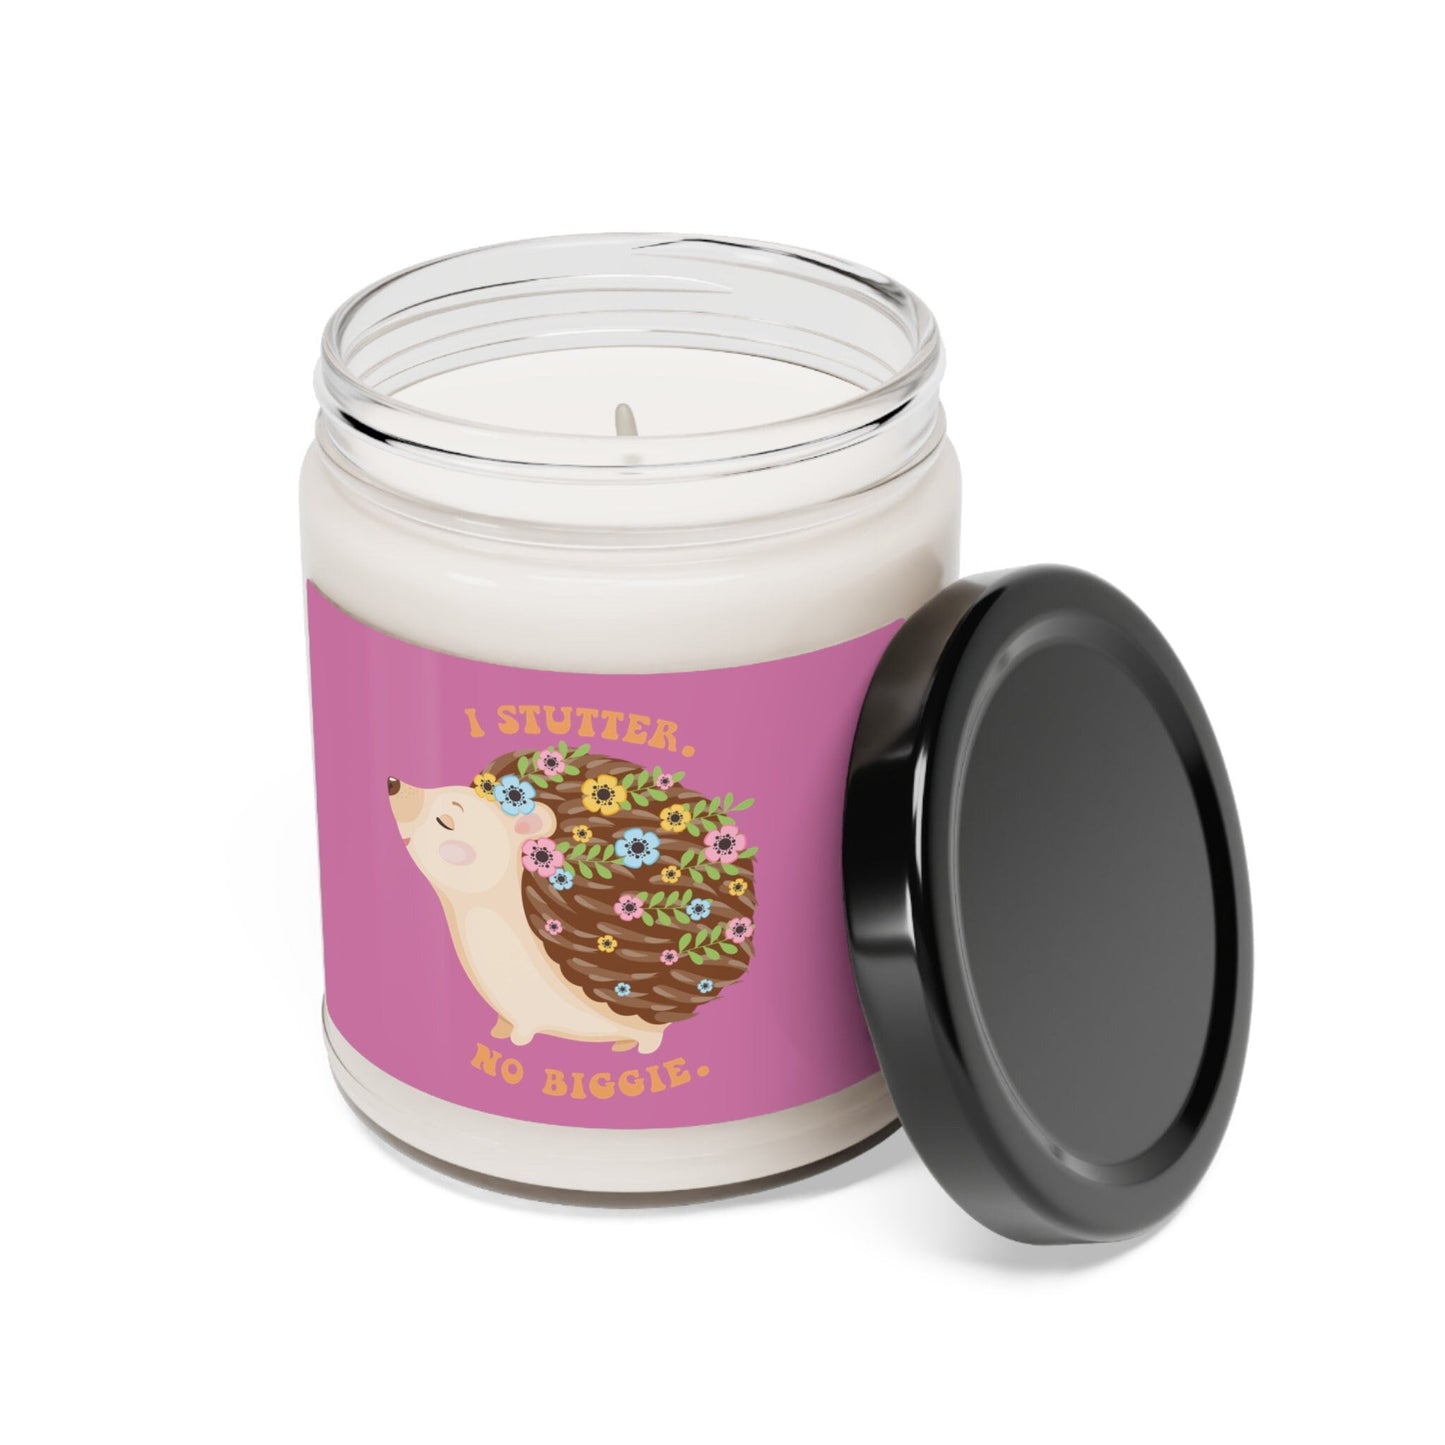 Stutter Hedgehog Candle Scented Soy Candle, 9oz